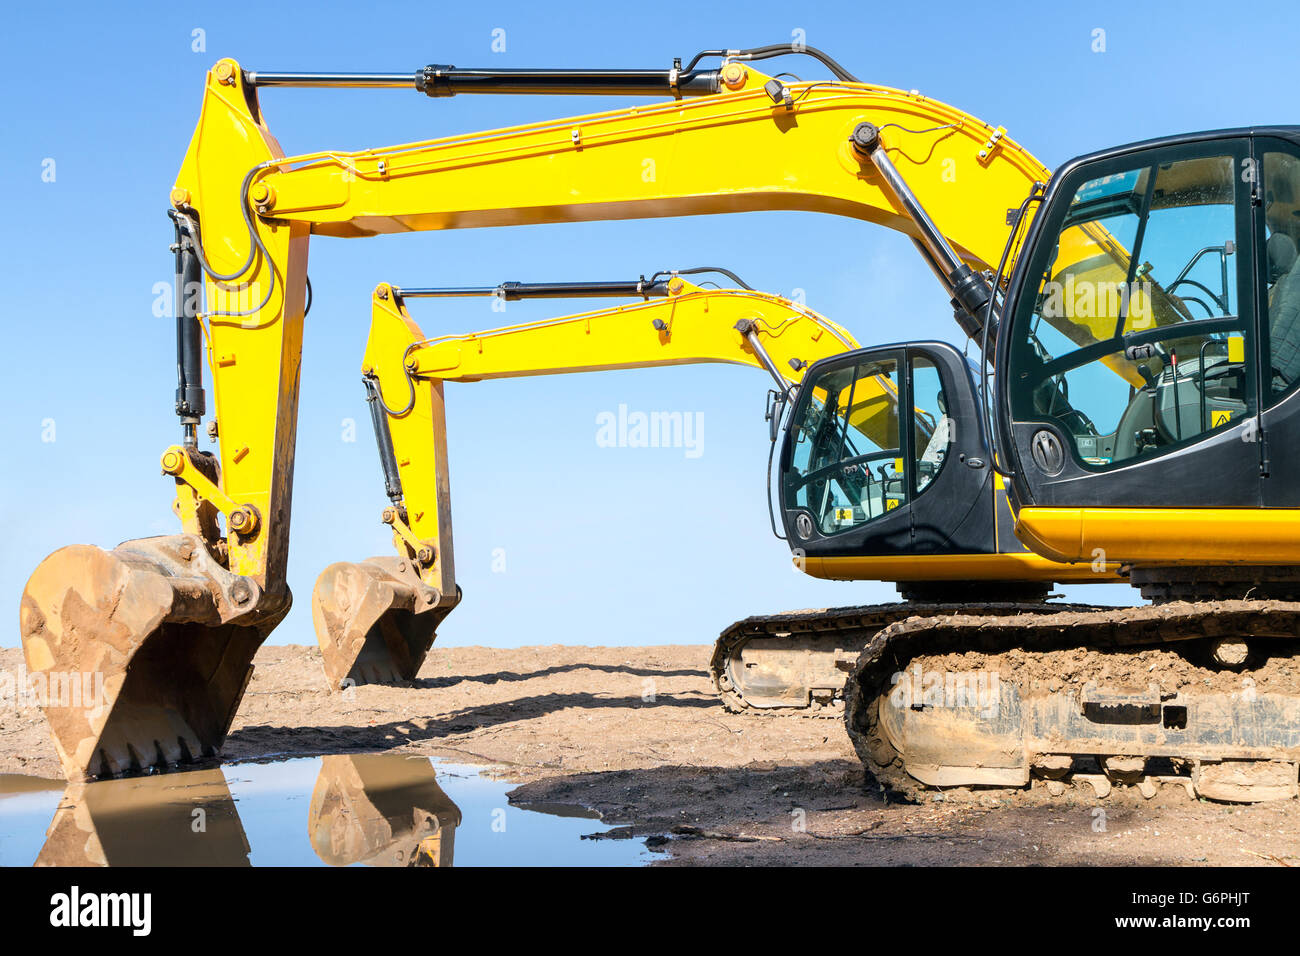 Yellow excavator on construction site against clear blue sky Stock Photo